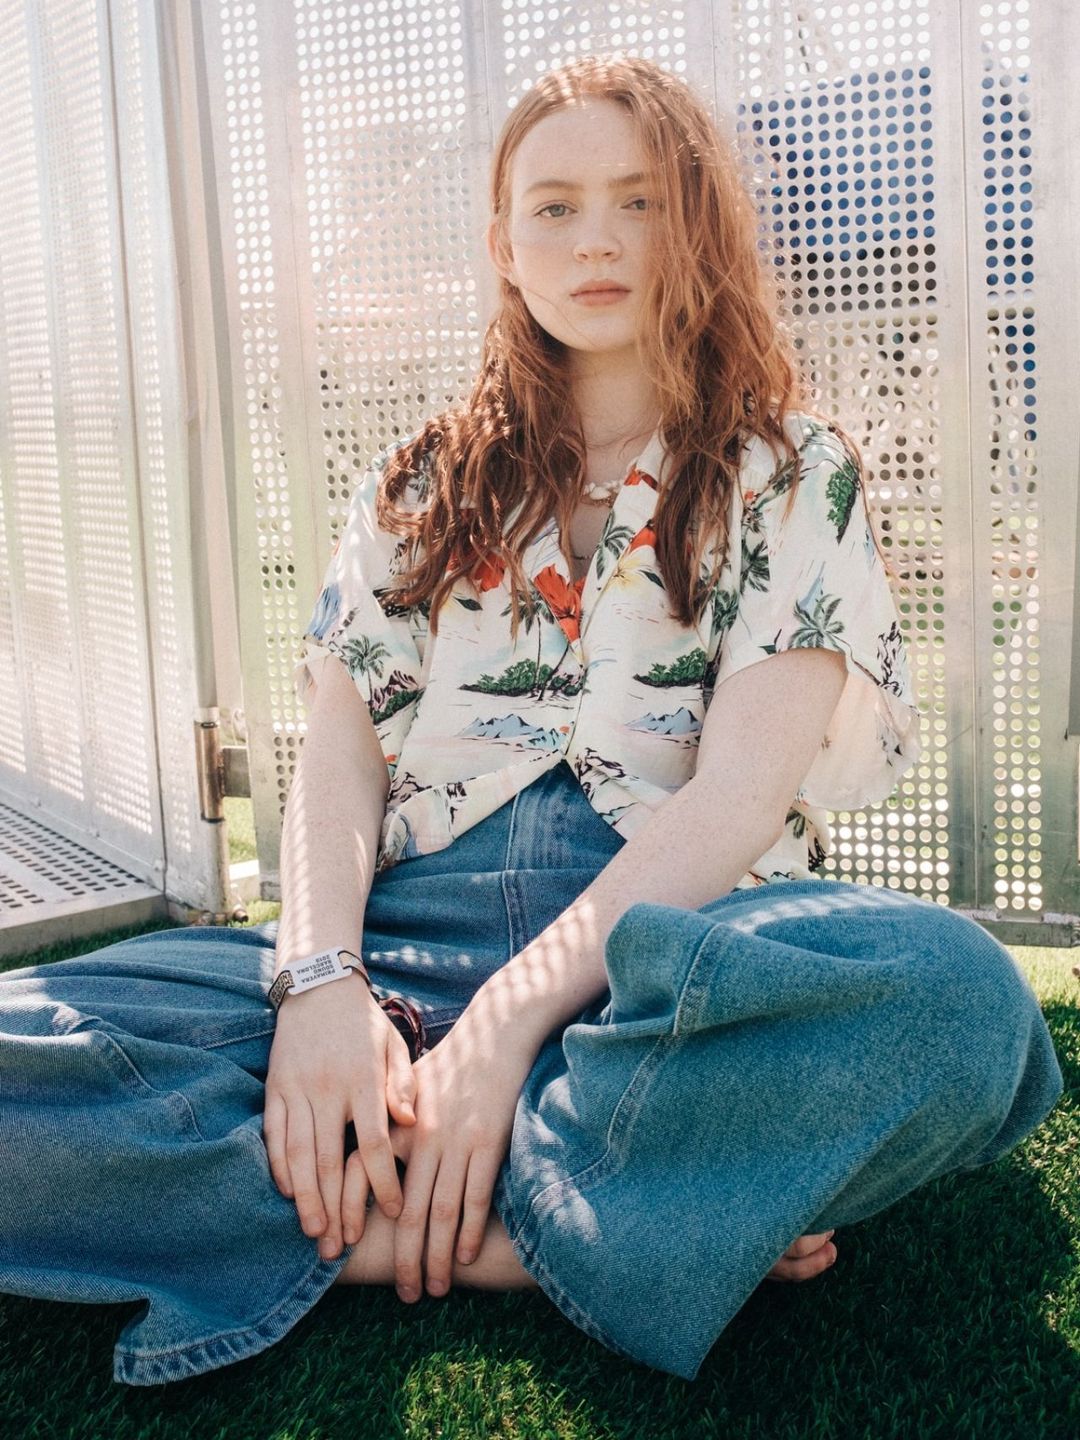 Sadie Sink who are her parents